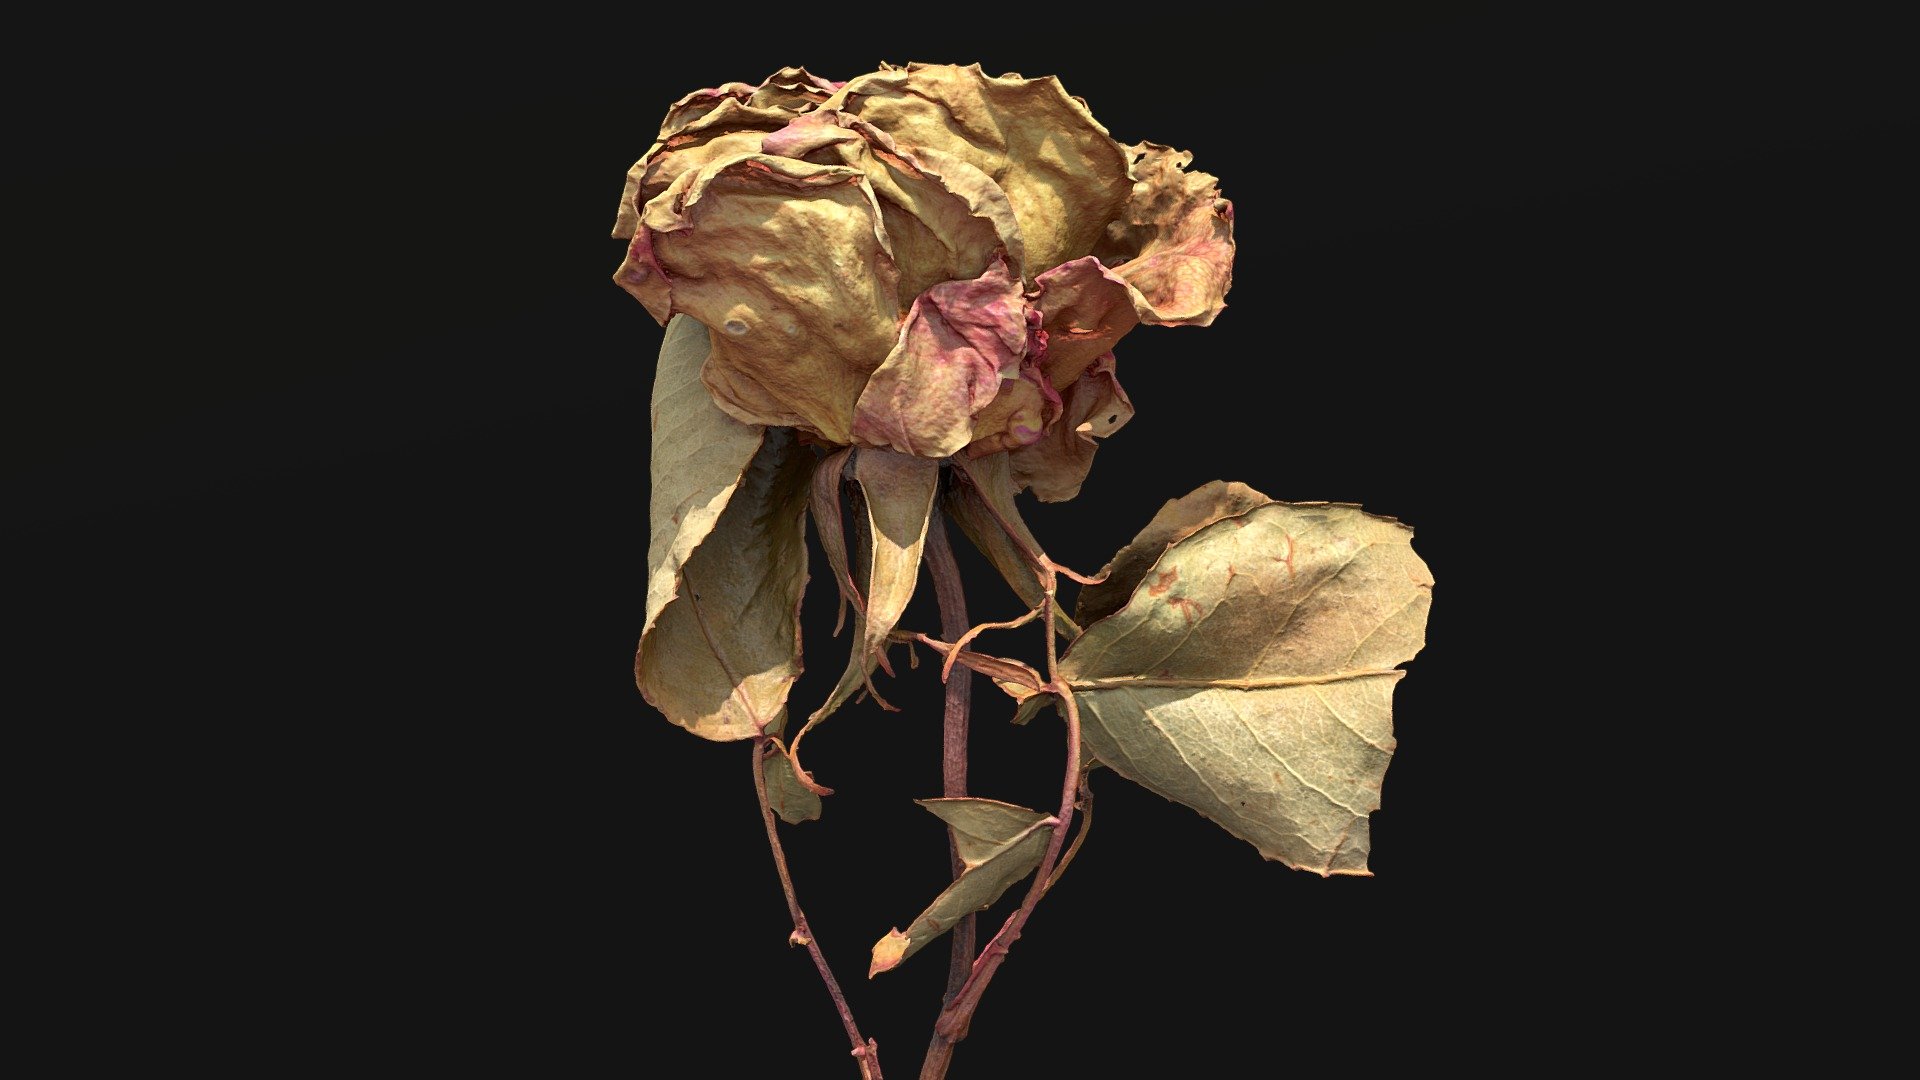 Dried Rose 02 .::RAWscan::.

4k Texture+Normal map+Occlusion

3D scan by photogrammetry - Dried Rose 02 .::RAWscan:: 3d model